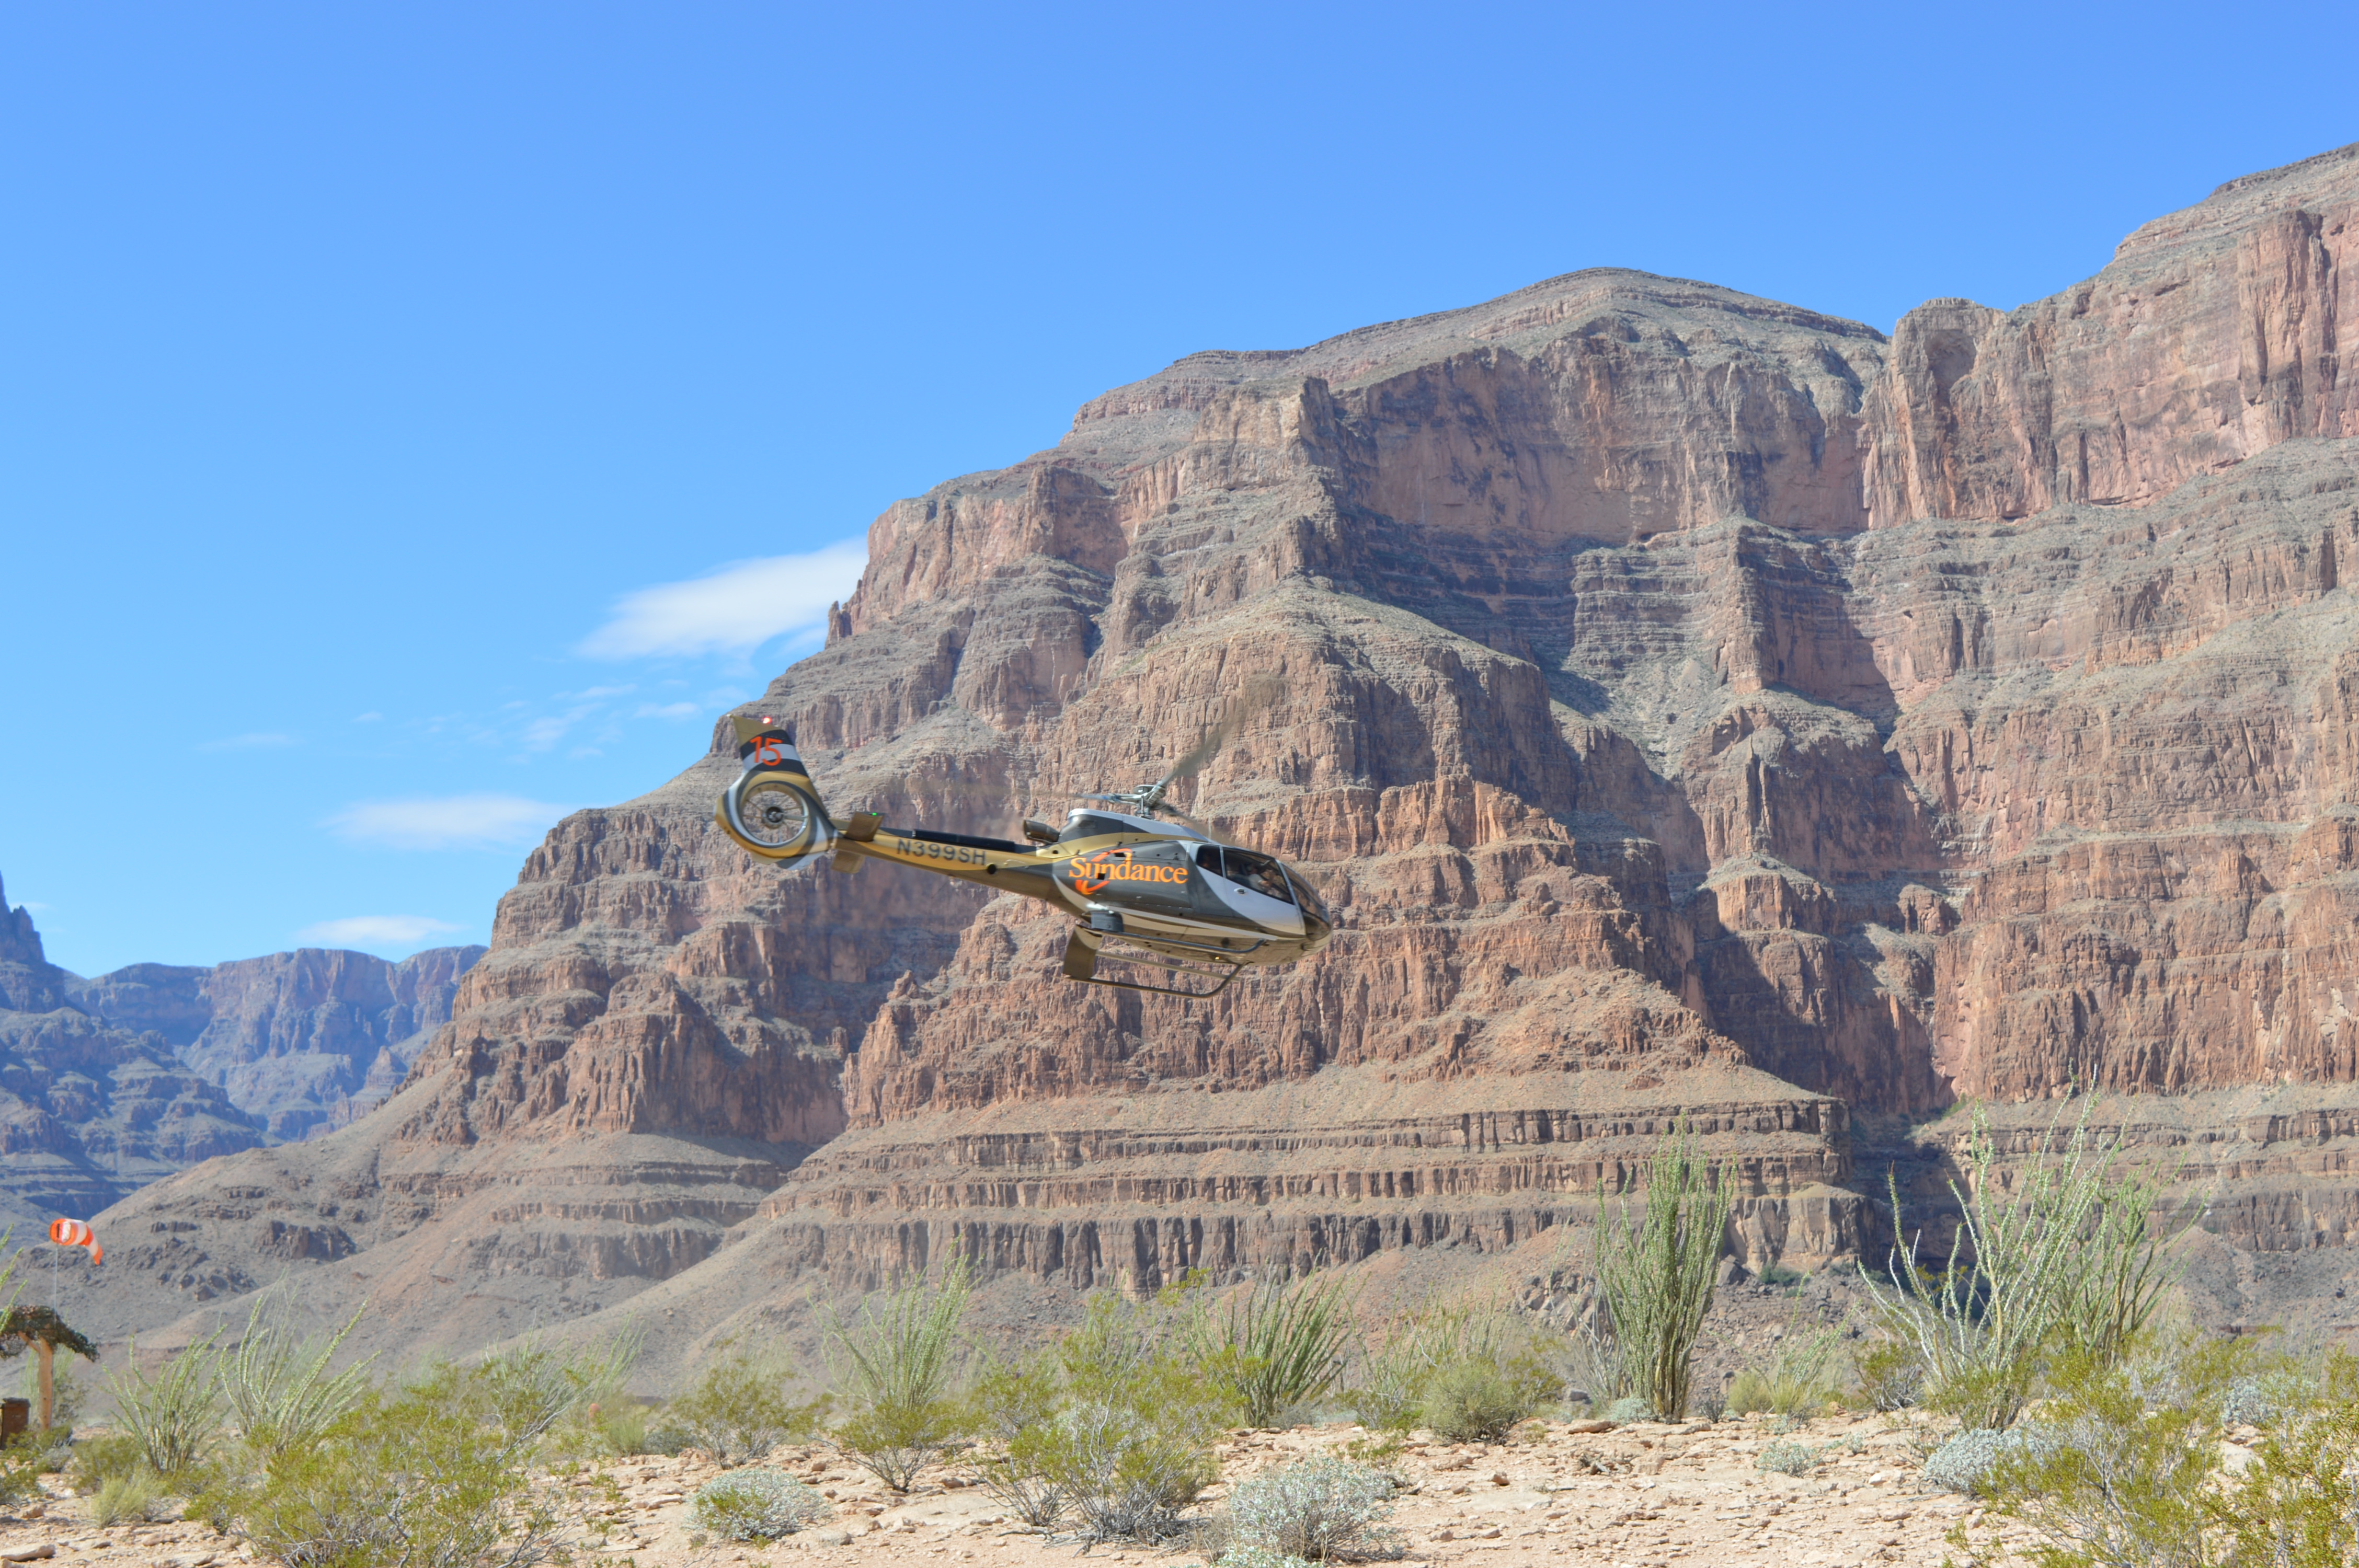 Helicopter taking off from the Grand Canyon